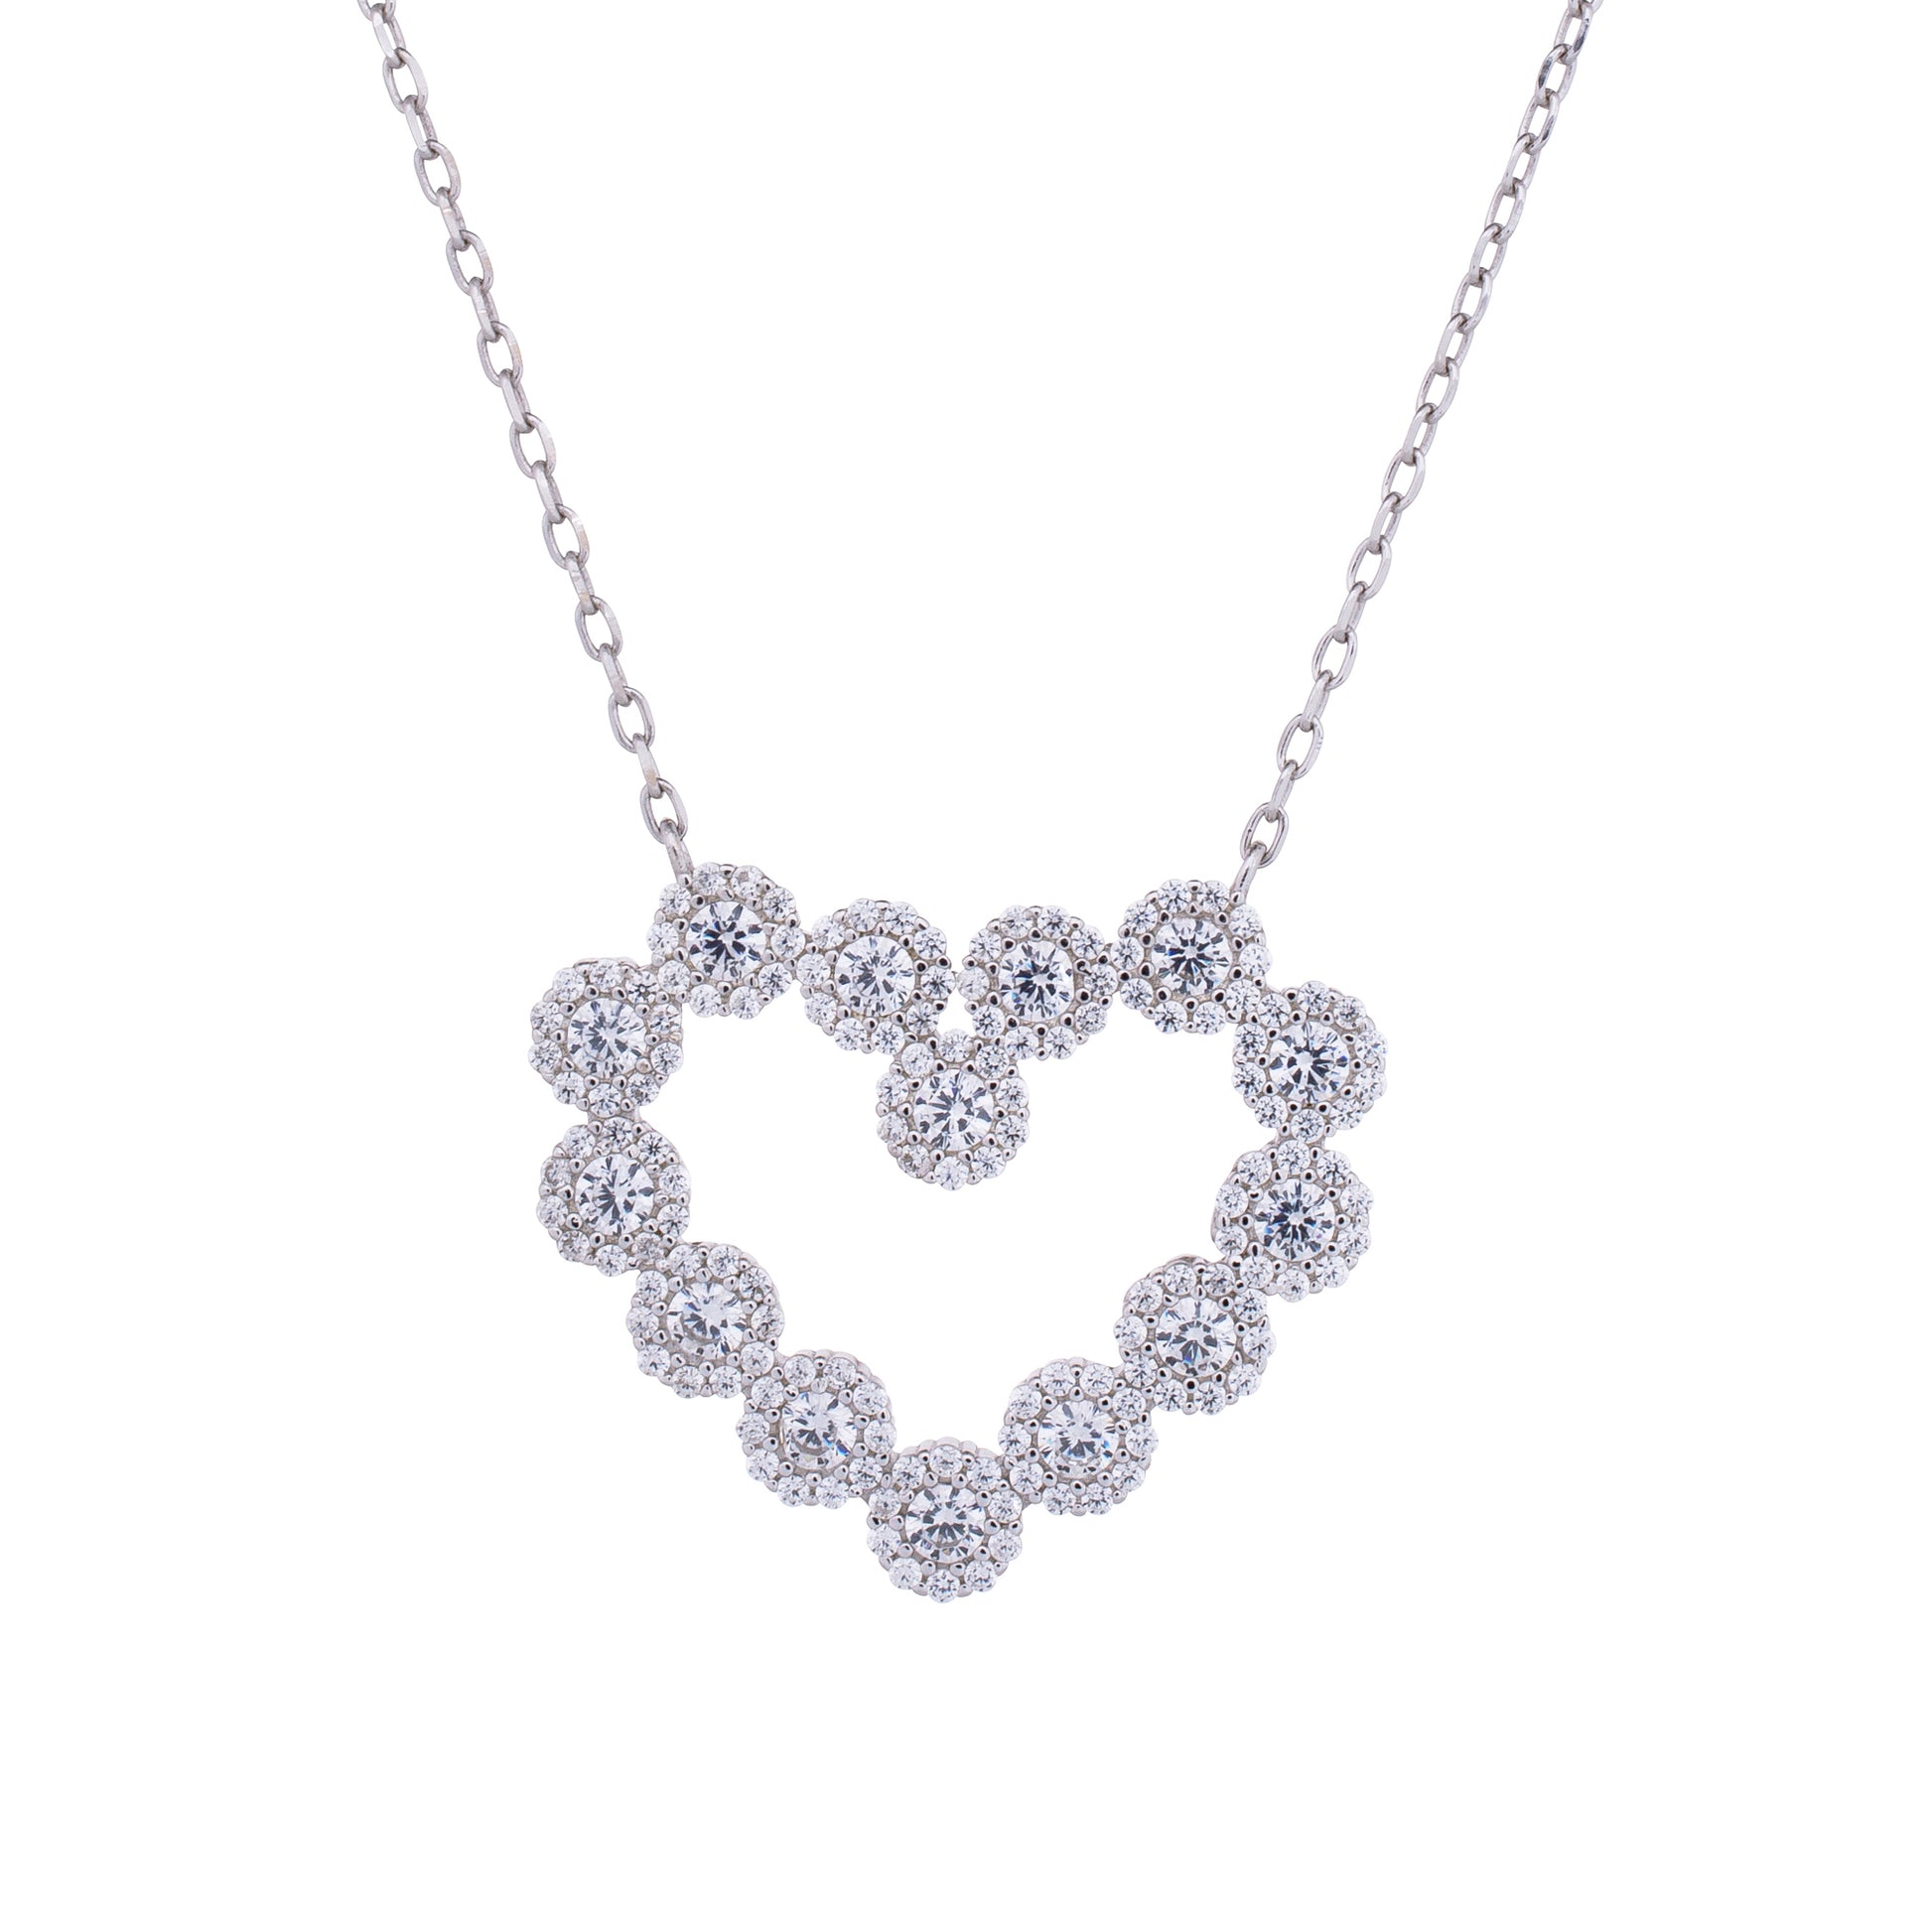 Silver  CZ Love Heart Halo Cluster Necklace 22mm x 25mm 15.5 + 2" - JACOBJN005